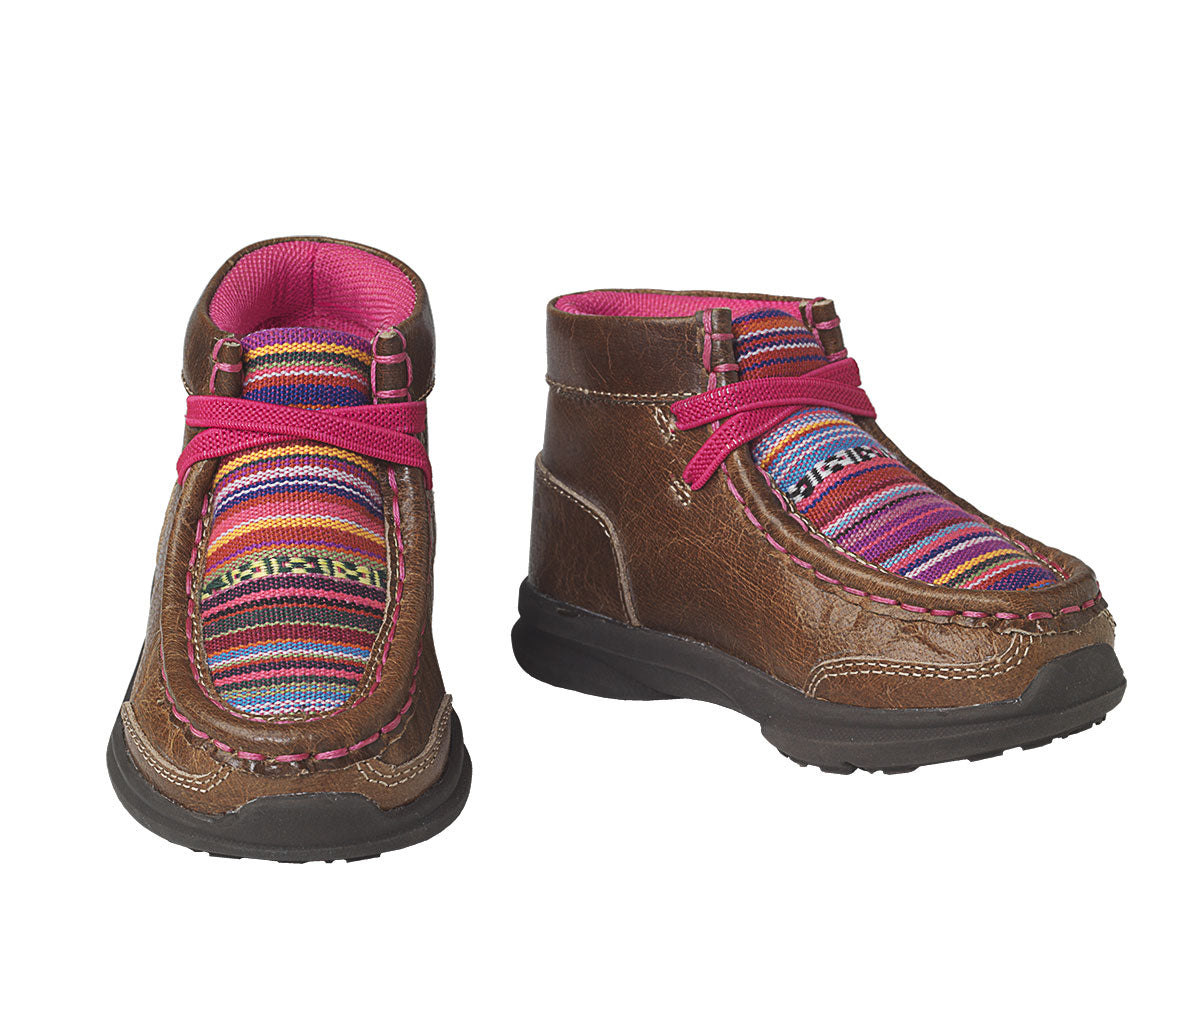 ARIAT LIL'STOMPERS "AURORA" TODDLER GIRL'S SHOES